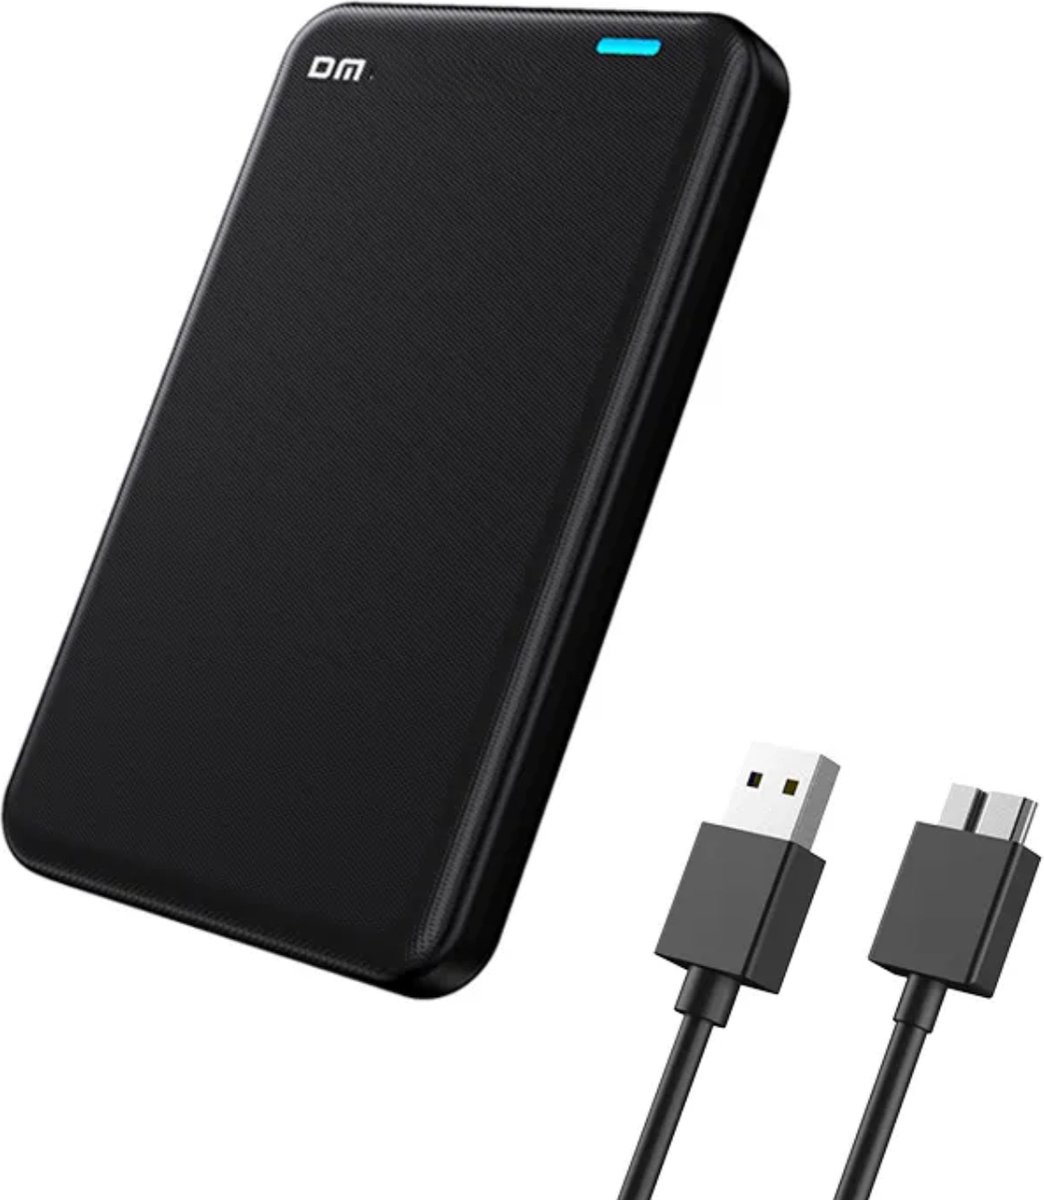 DM - Harde schijf behuizing 2.5 inch - USB 3.2 - SATA + SSD ondersteuning - 5Gbps - Snelle overdracht - plug & play